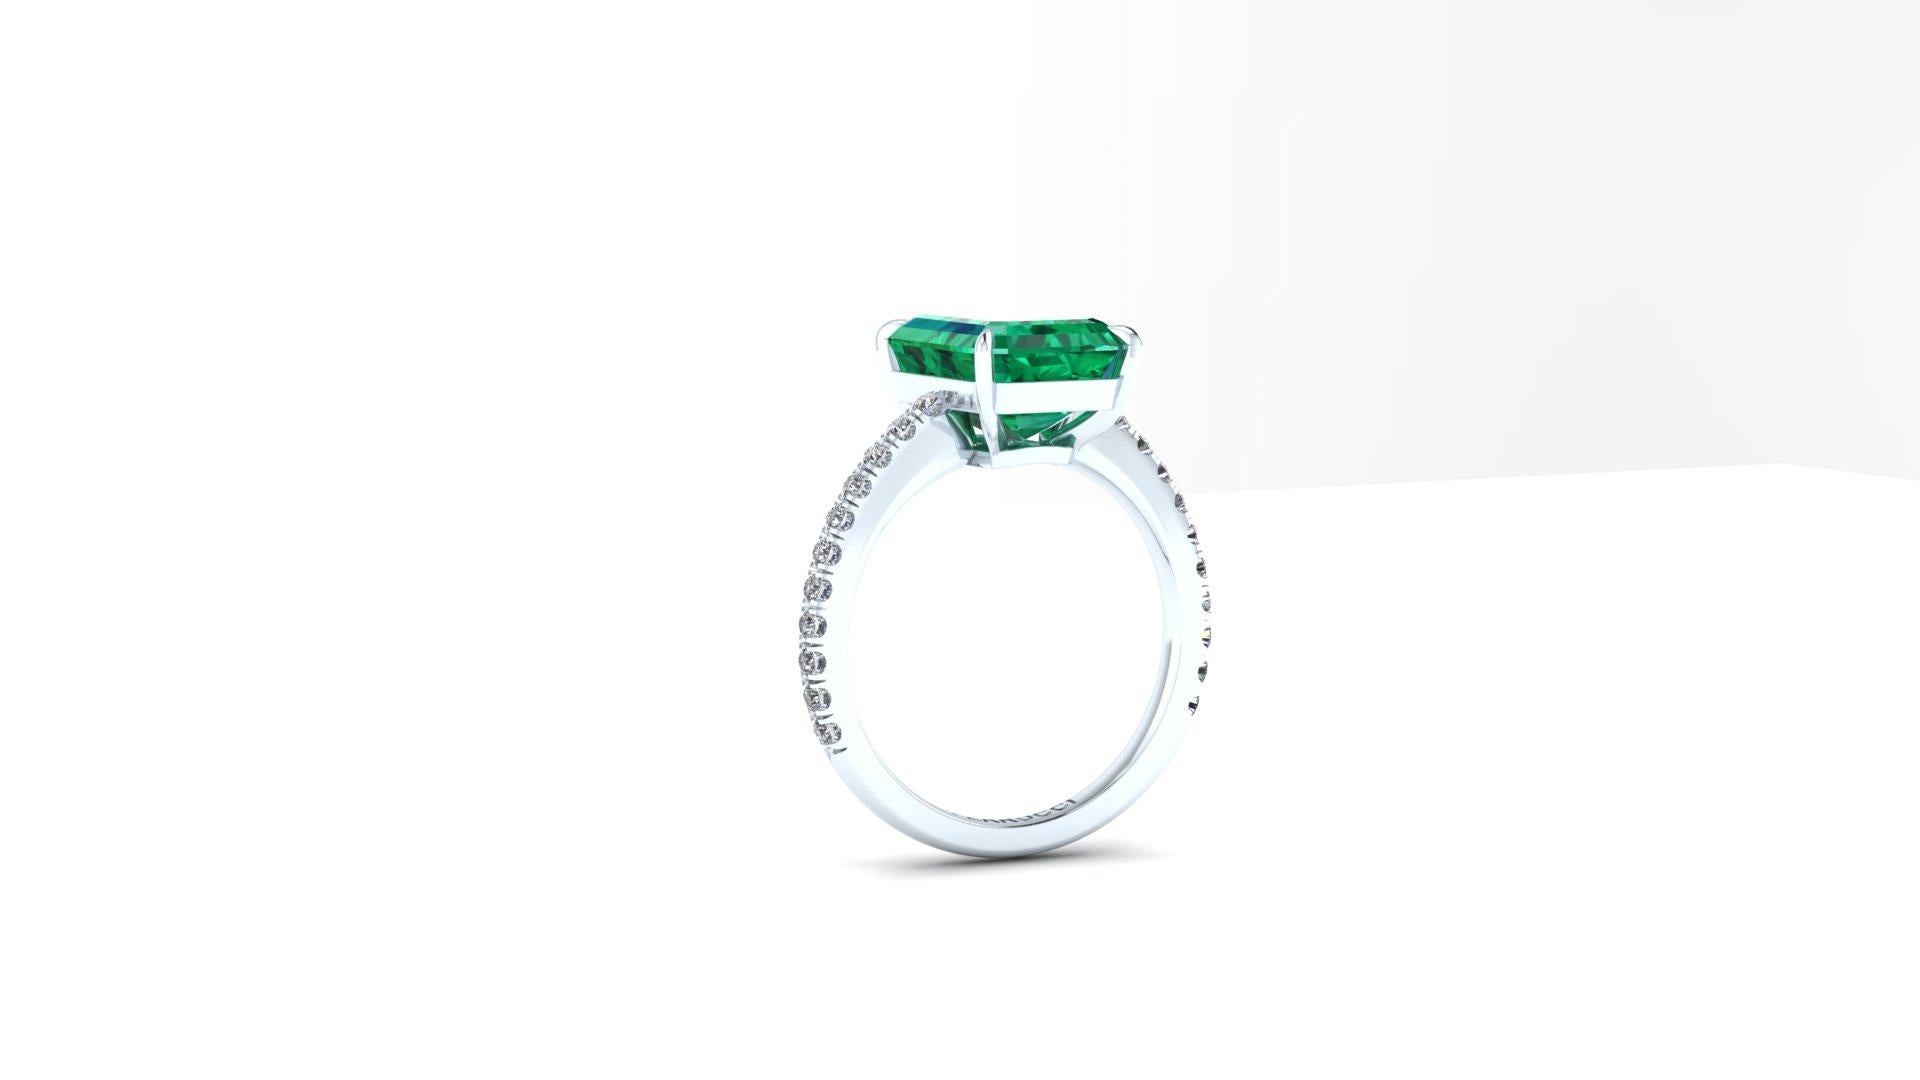  3.27 Carat Colombian Emerald Cut Emerald and Diamond Platinum Ring For Sale 1